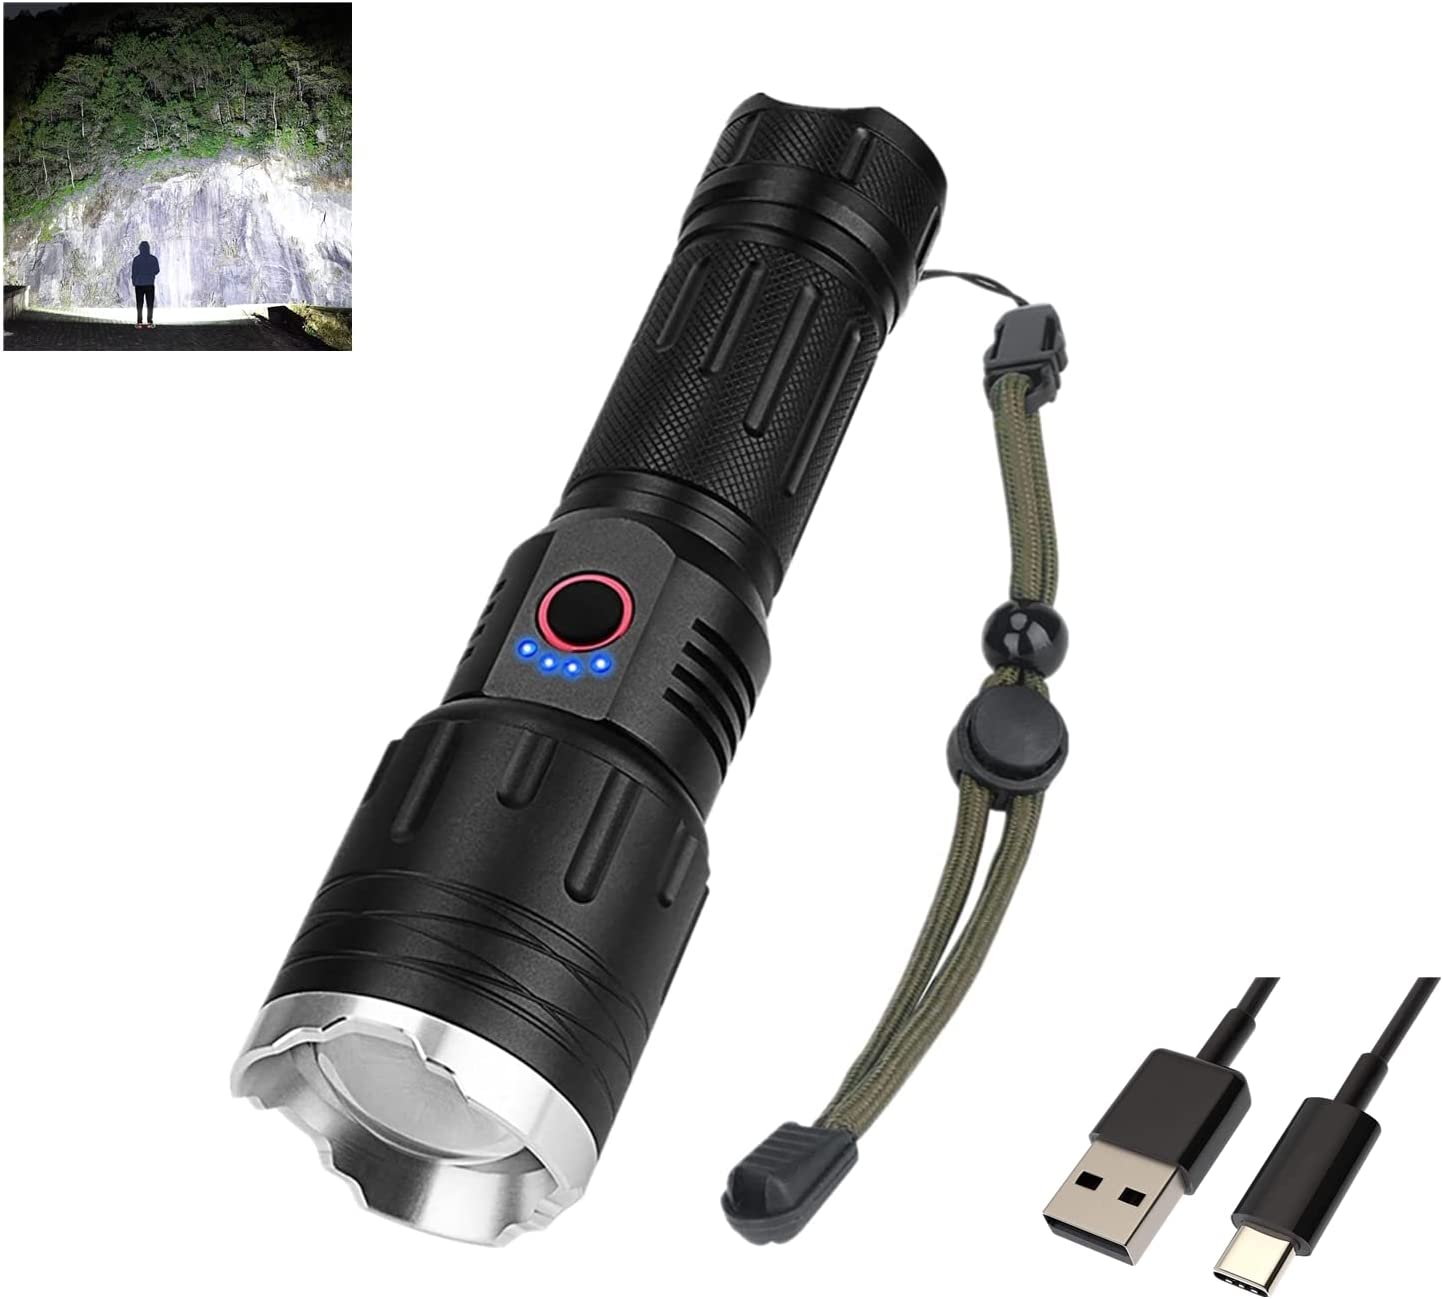 WINDFIRE Brightest Flashlight Rechargeable, Ultra Bright Tactical Flashlights 20000 Lumen with Zoomable 3 Modes, IPX6 Waterproof Camping Torch for Outdoor, Hiking, Dog Walking